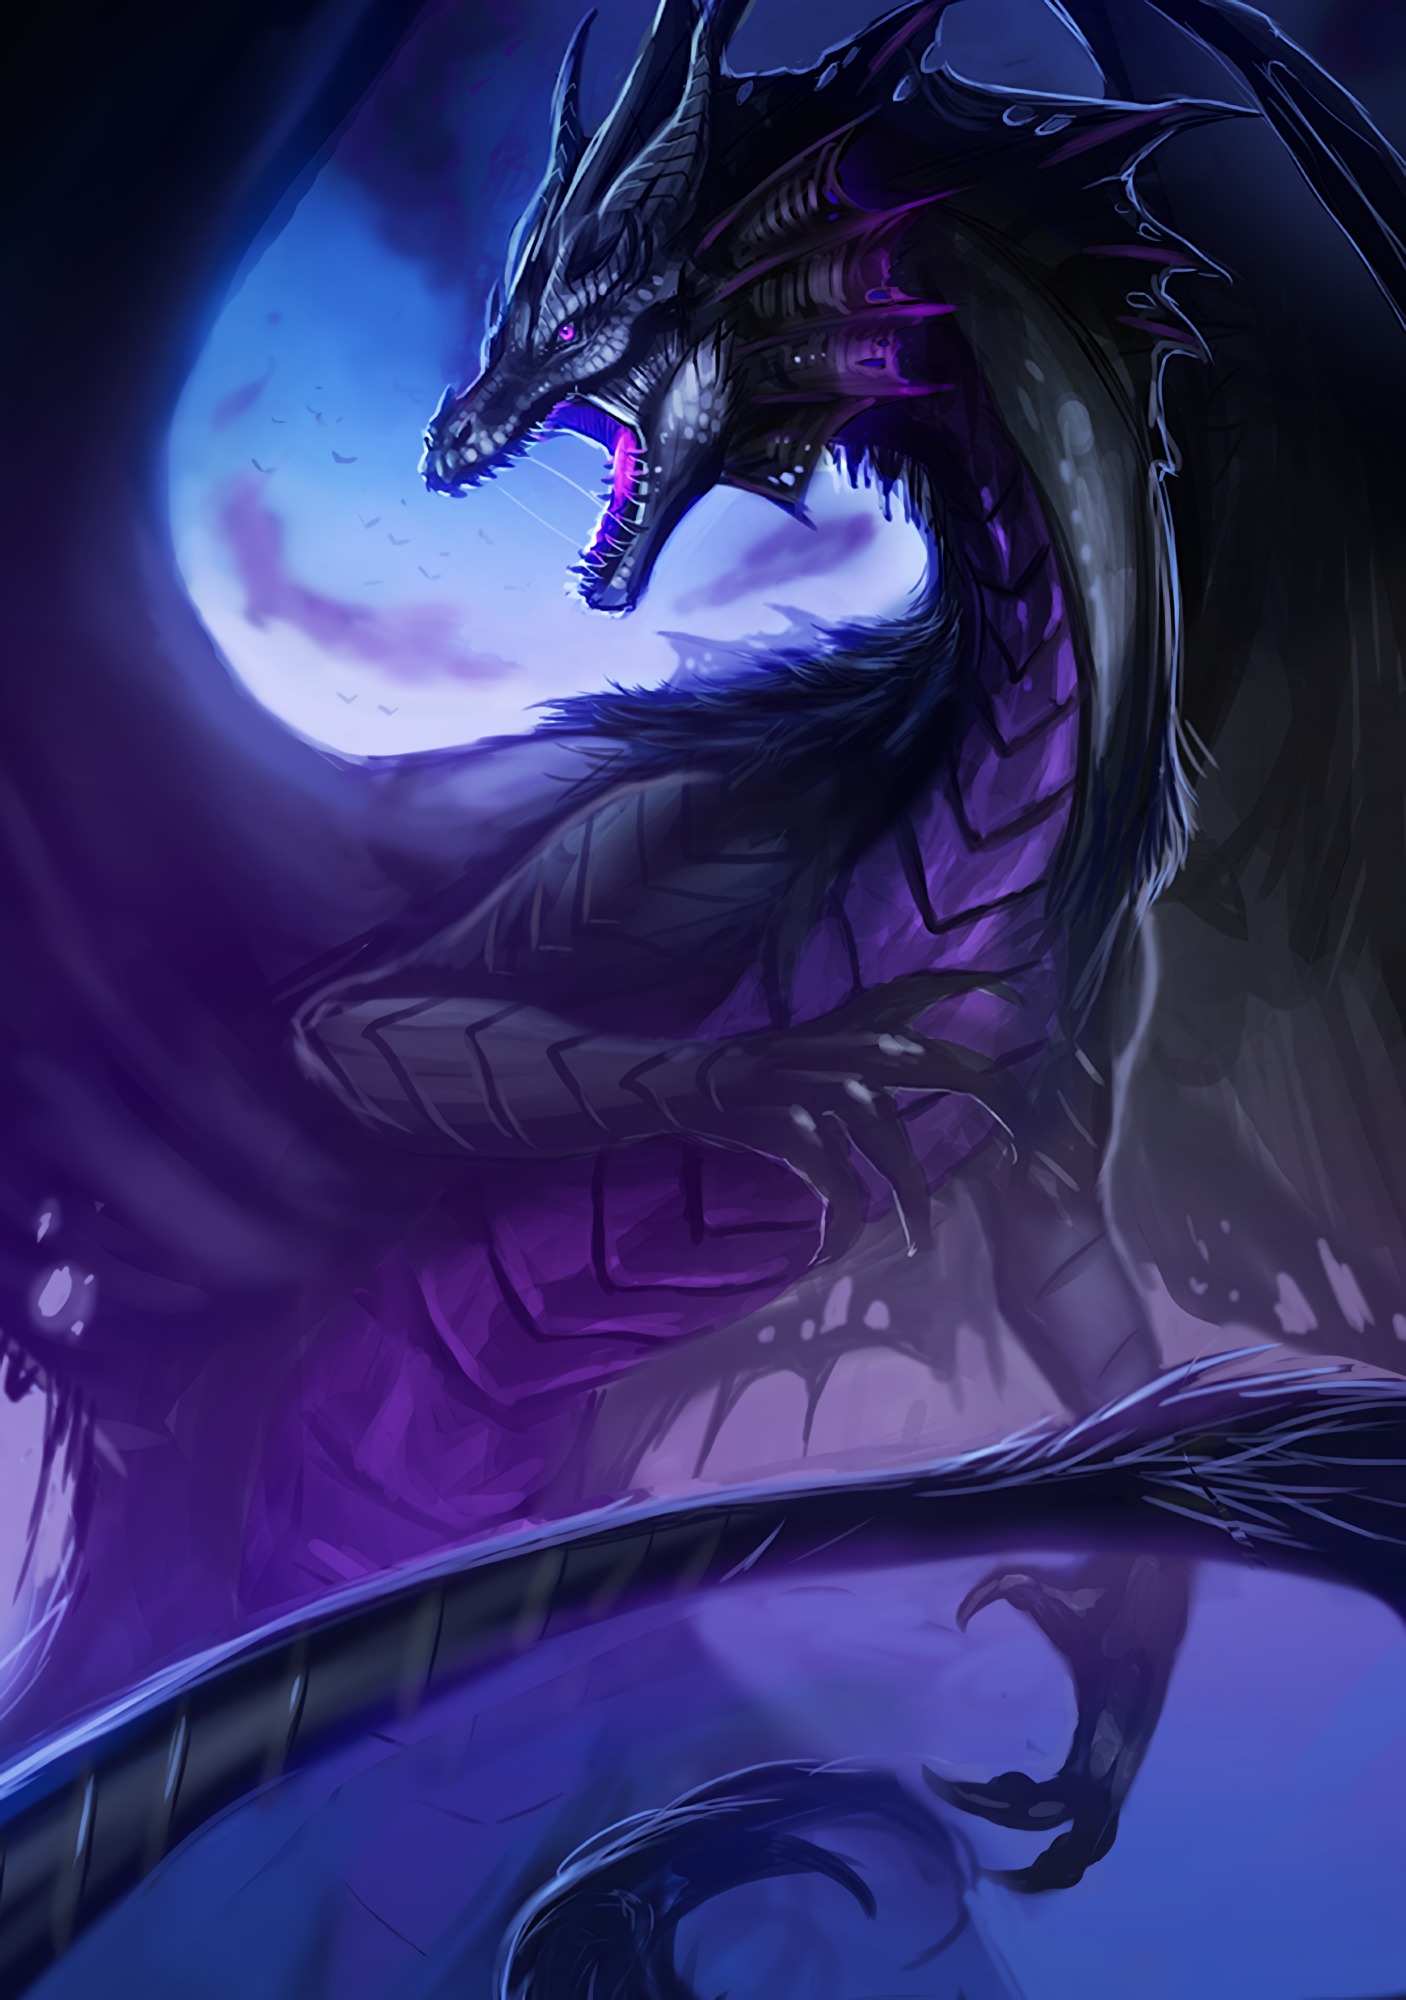 dragon, that's incredible, grin, art, being, creature, fiction wallpaper for mobile